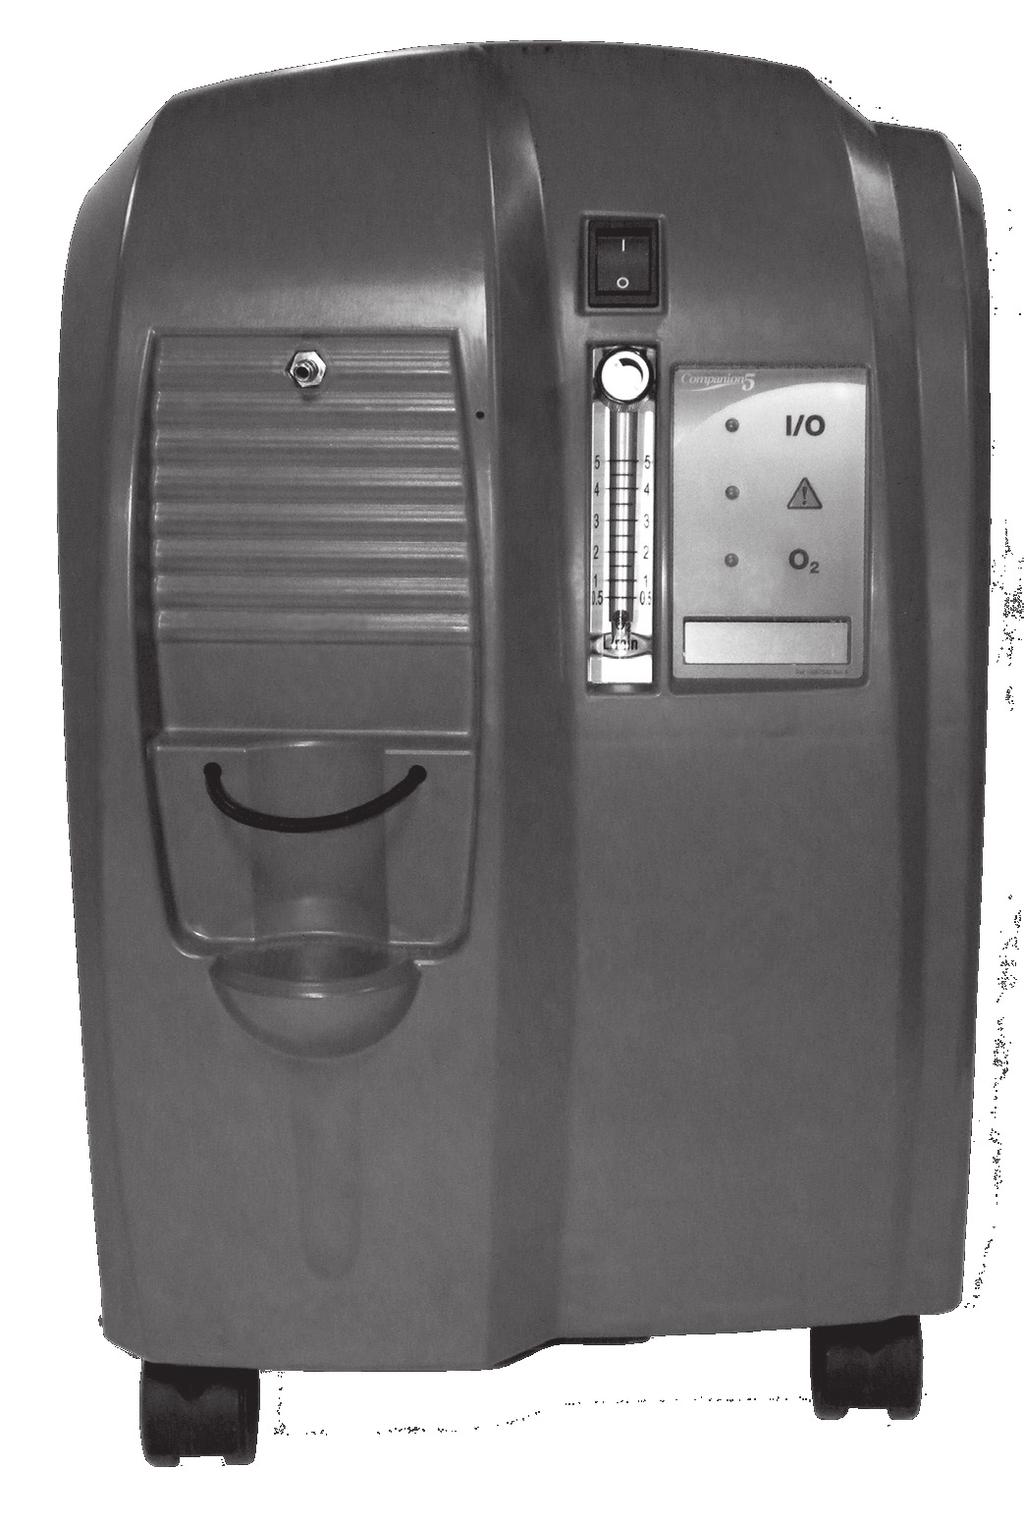 Introduction to the Companion 5 Oxygen Concentrator